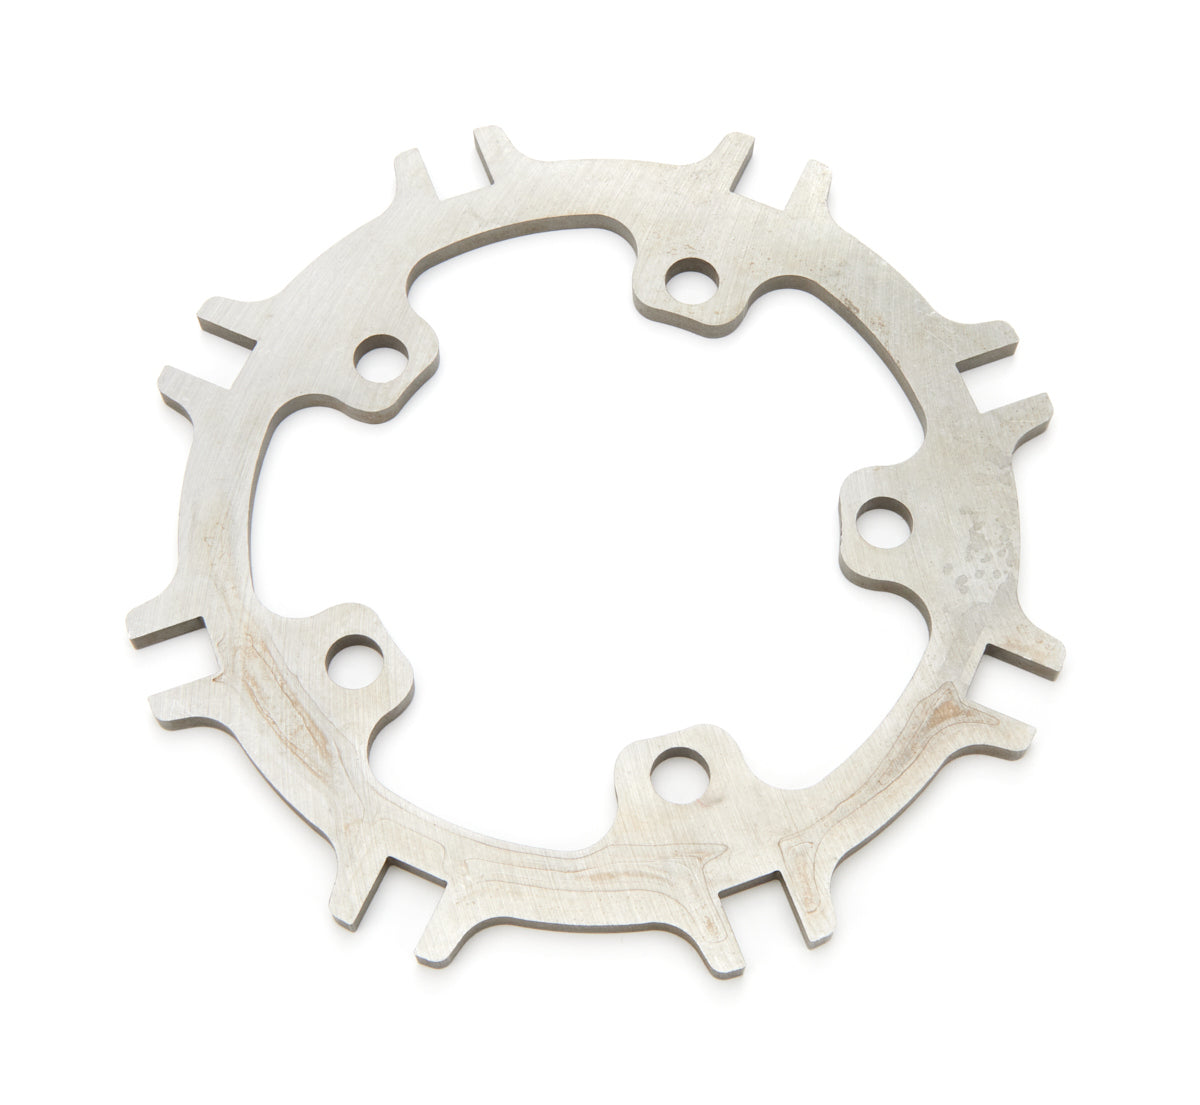 Brake Rotor Adapter - 5 x 4.500 in Bolt Pattern to 8 x 7.000 in Rotor Bolt Pattern - Steel - Natural - Each